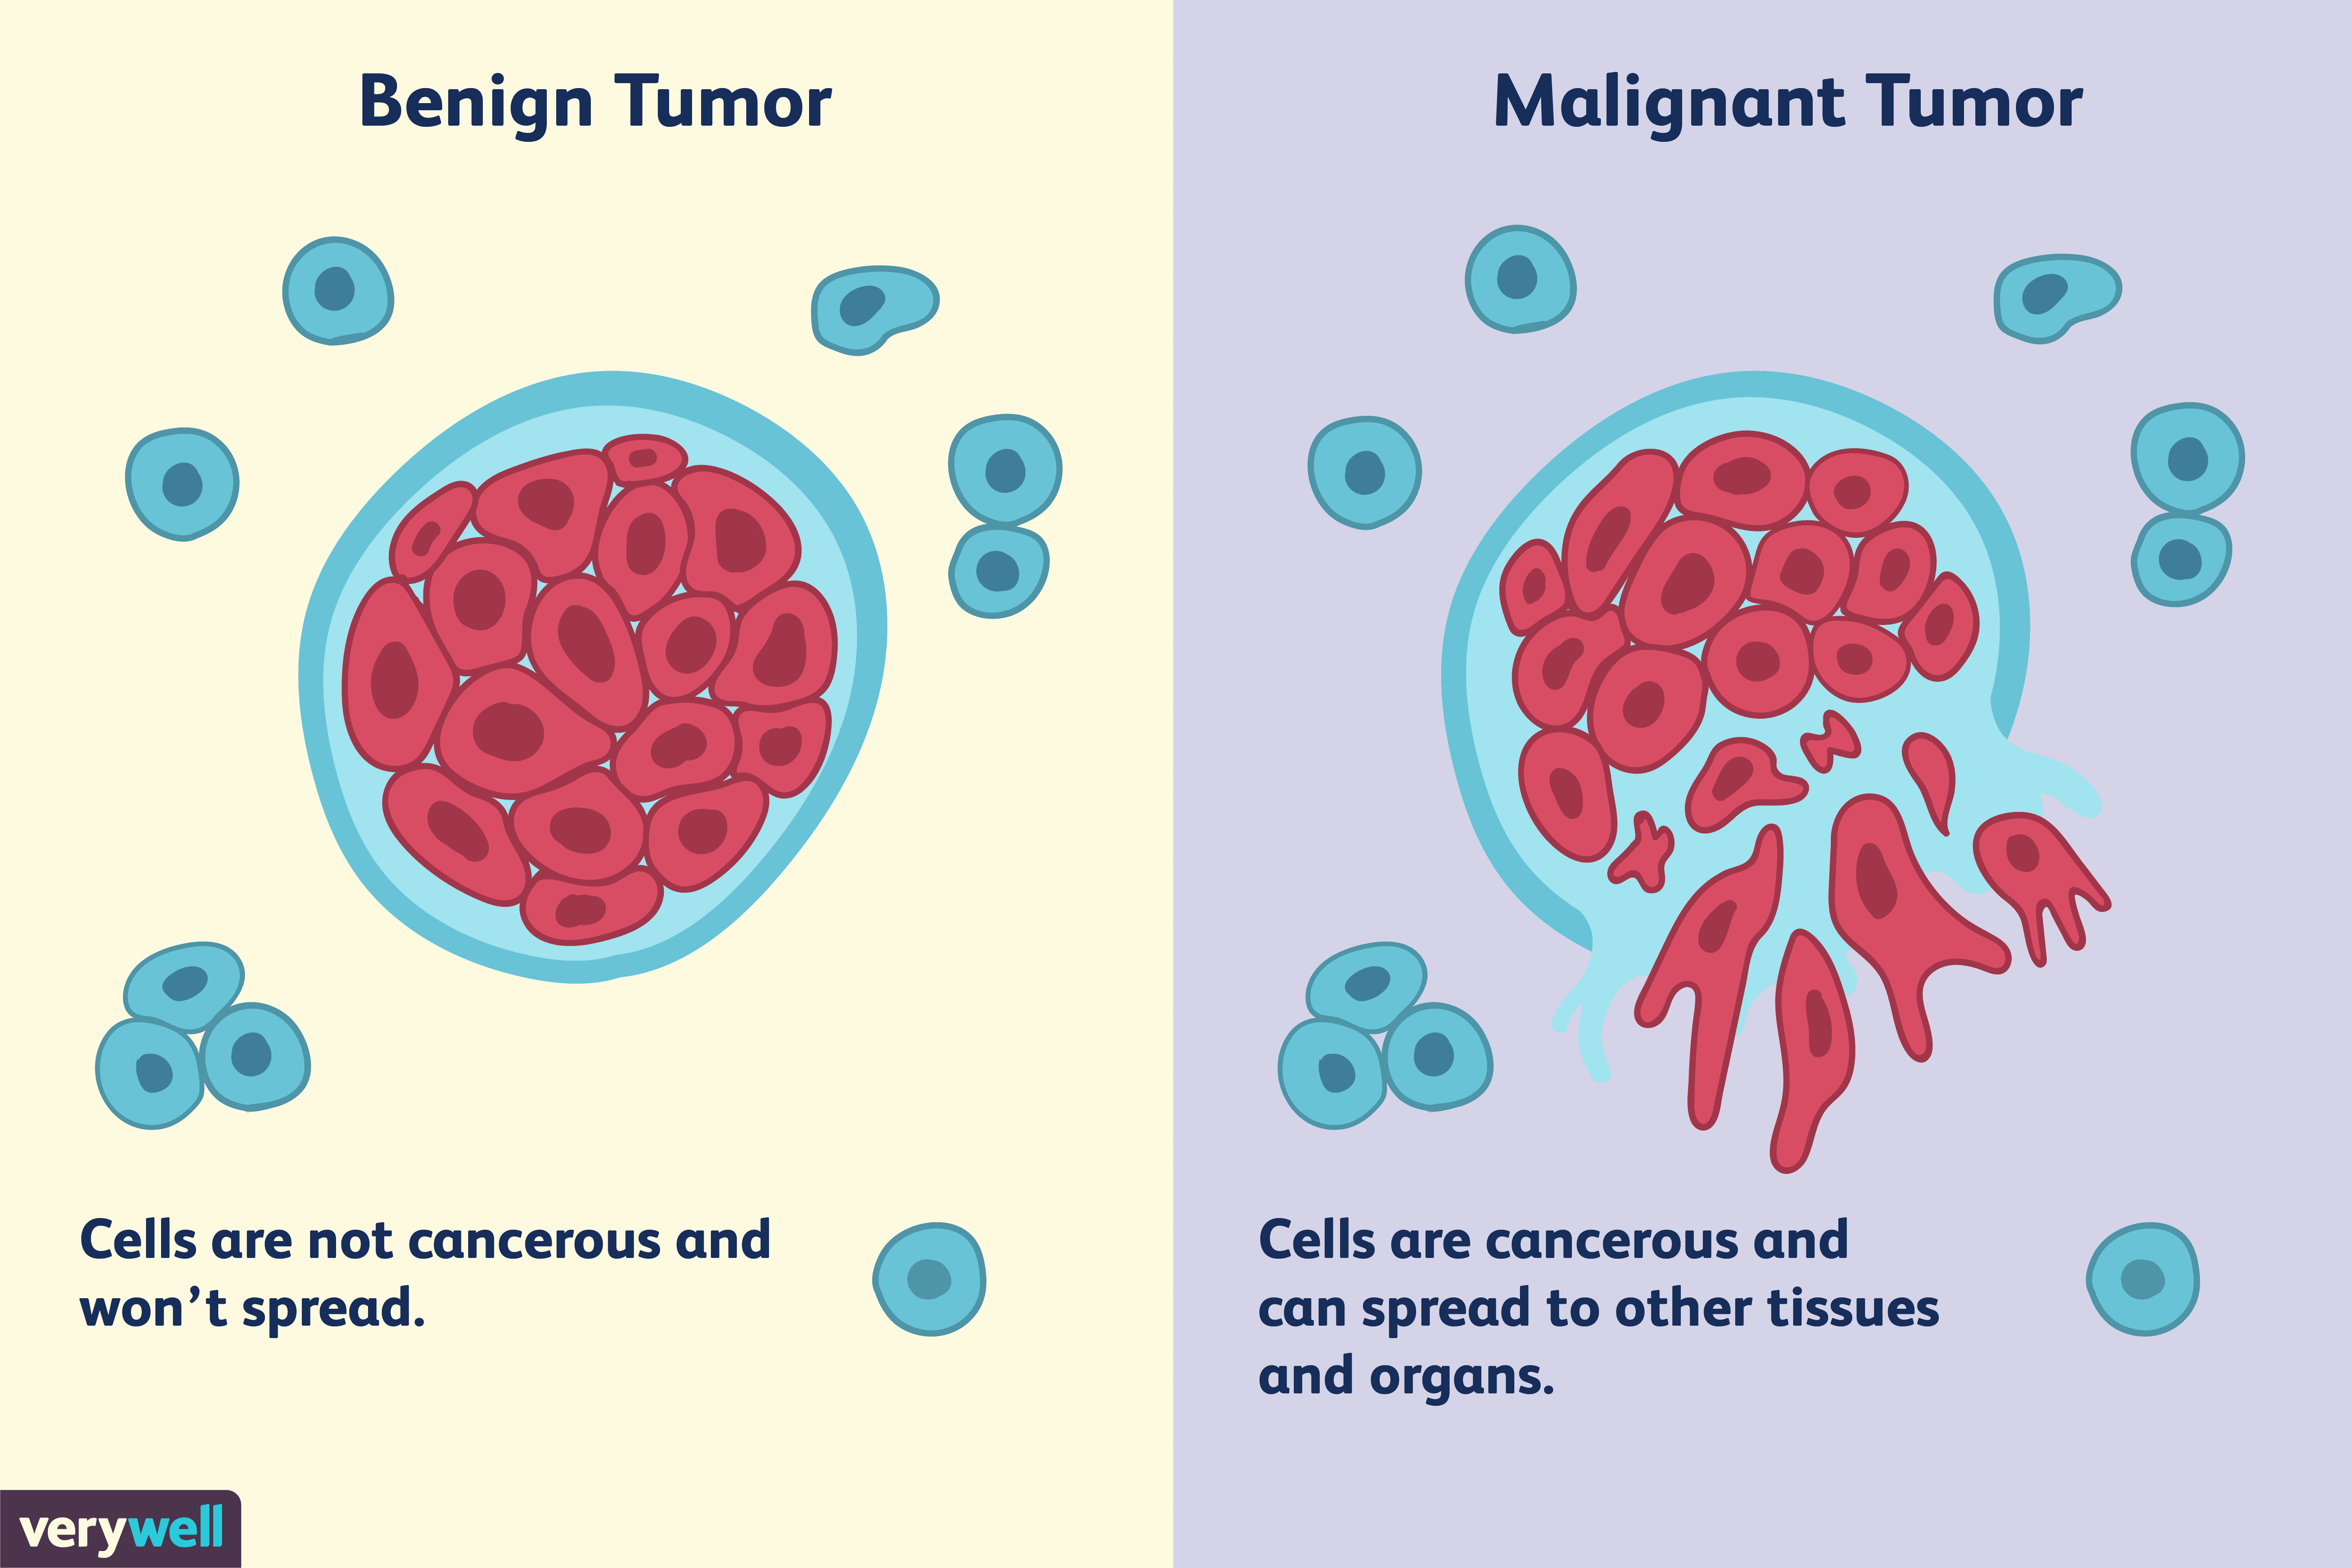 Differences Between a Malignant and Benign Tumor